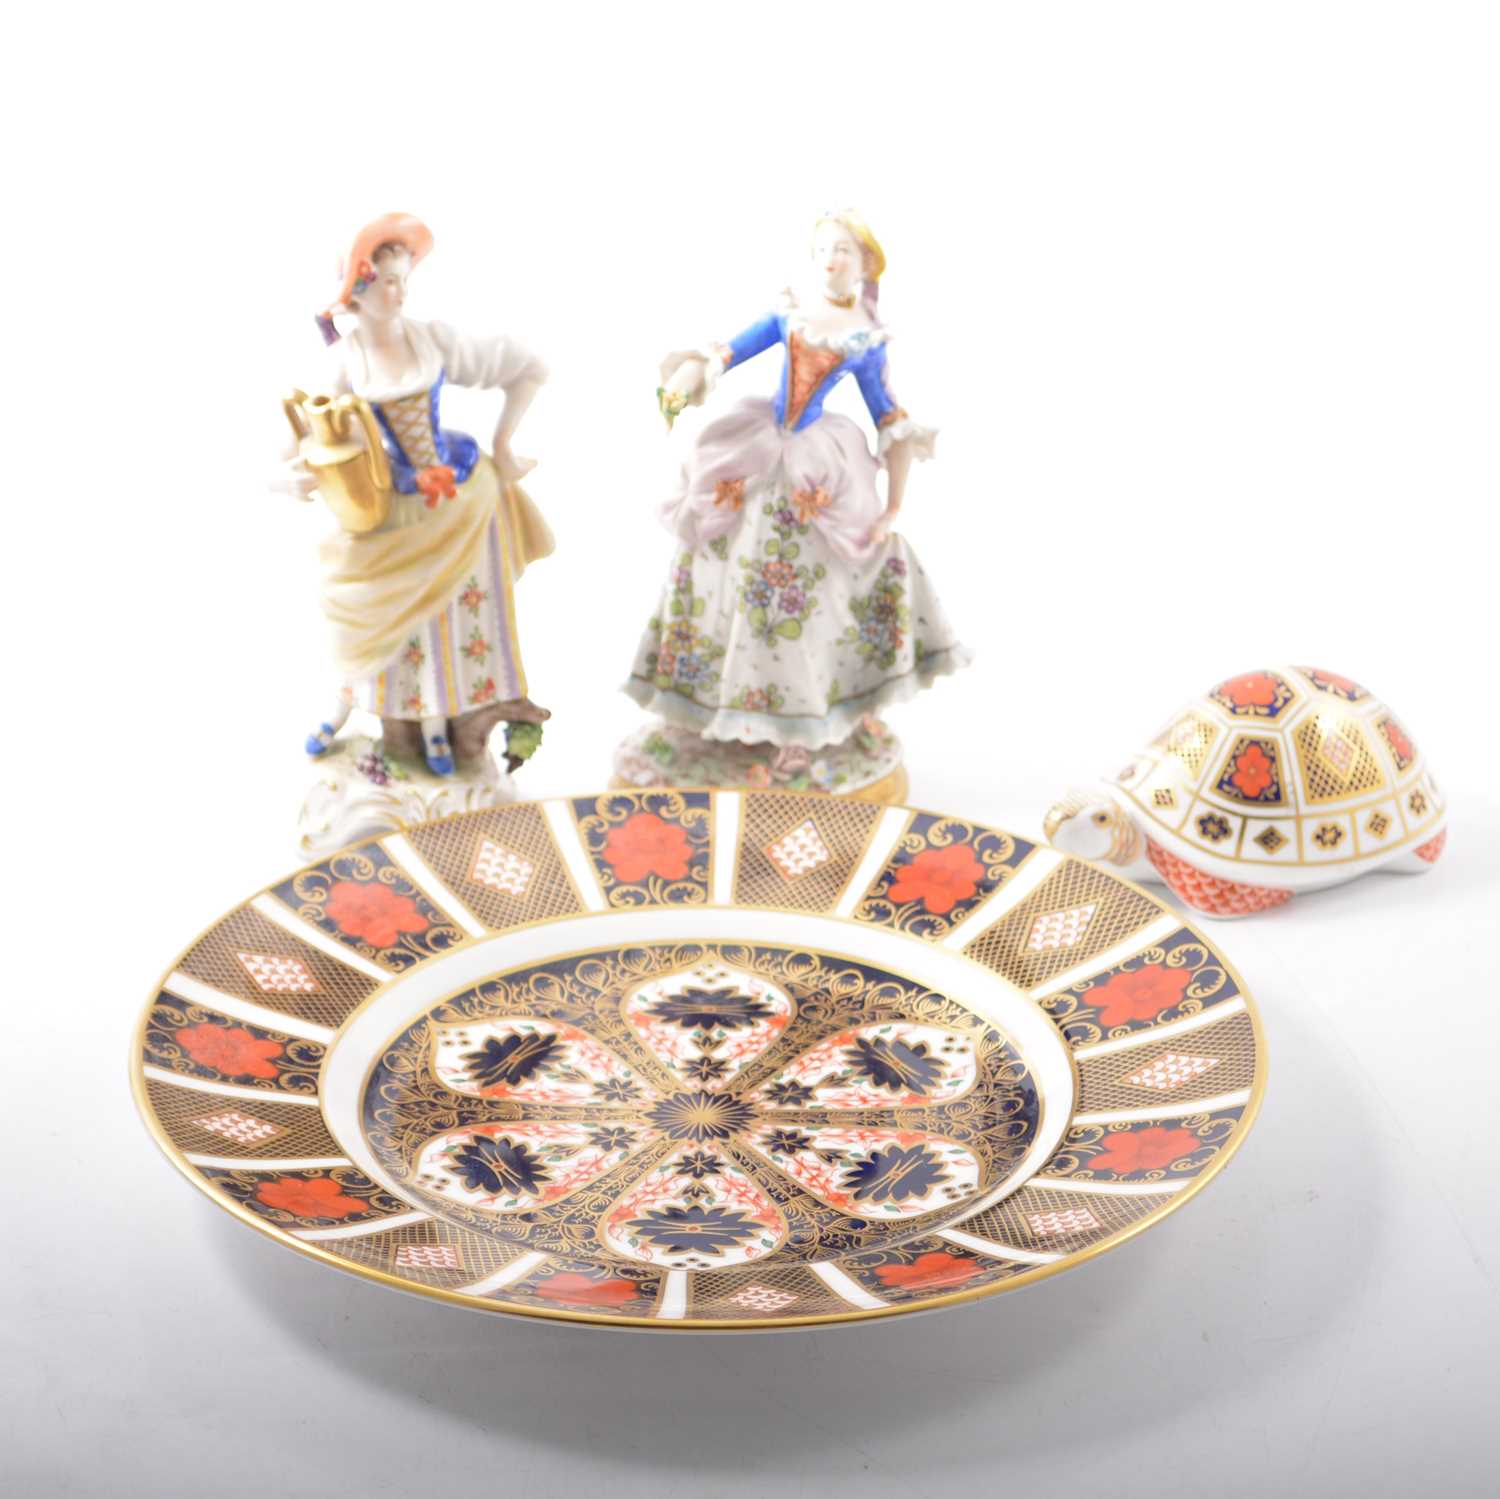 Lot 14 - Royal Crown Derby Imari plate, tortoise paperweight and two continental figurines.